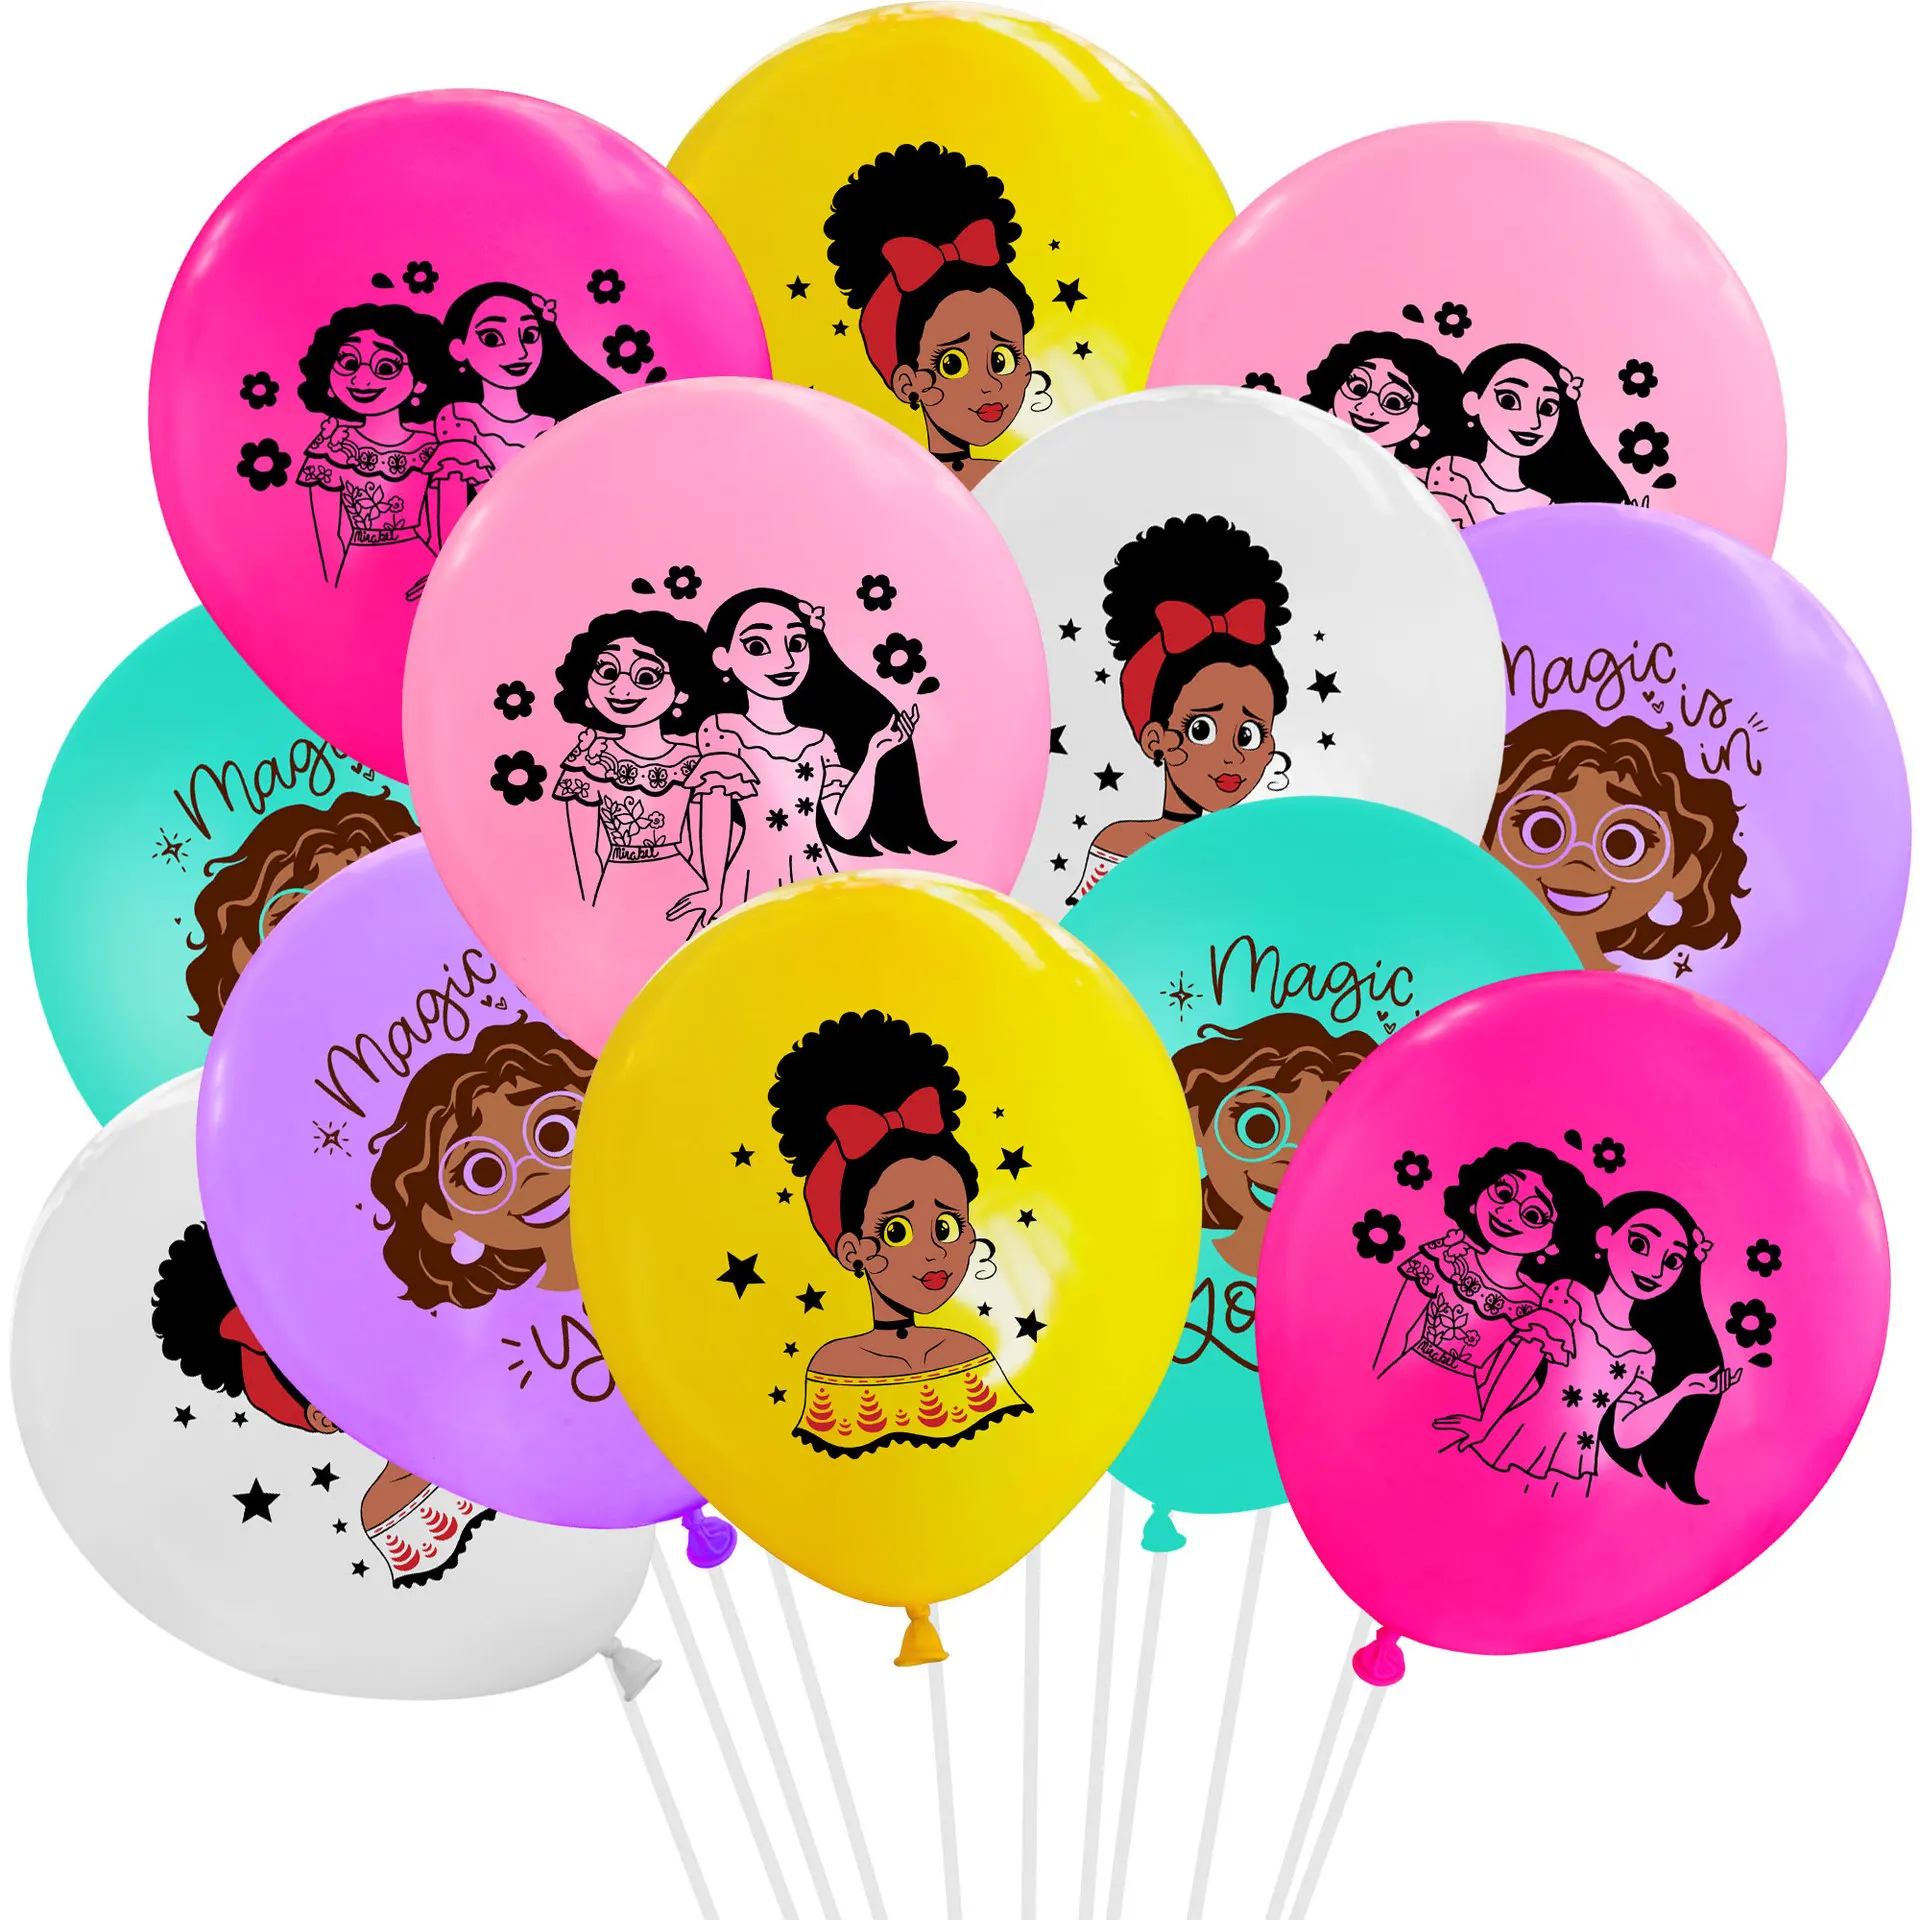 

Disney Encanto Latex Balloon Mirabel Princess Birthday Party Decoration Balloons for Kids Girls Baby Shower Party Decor Supplies